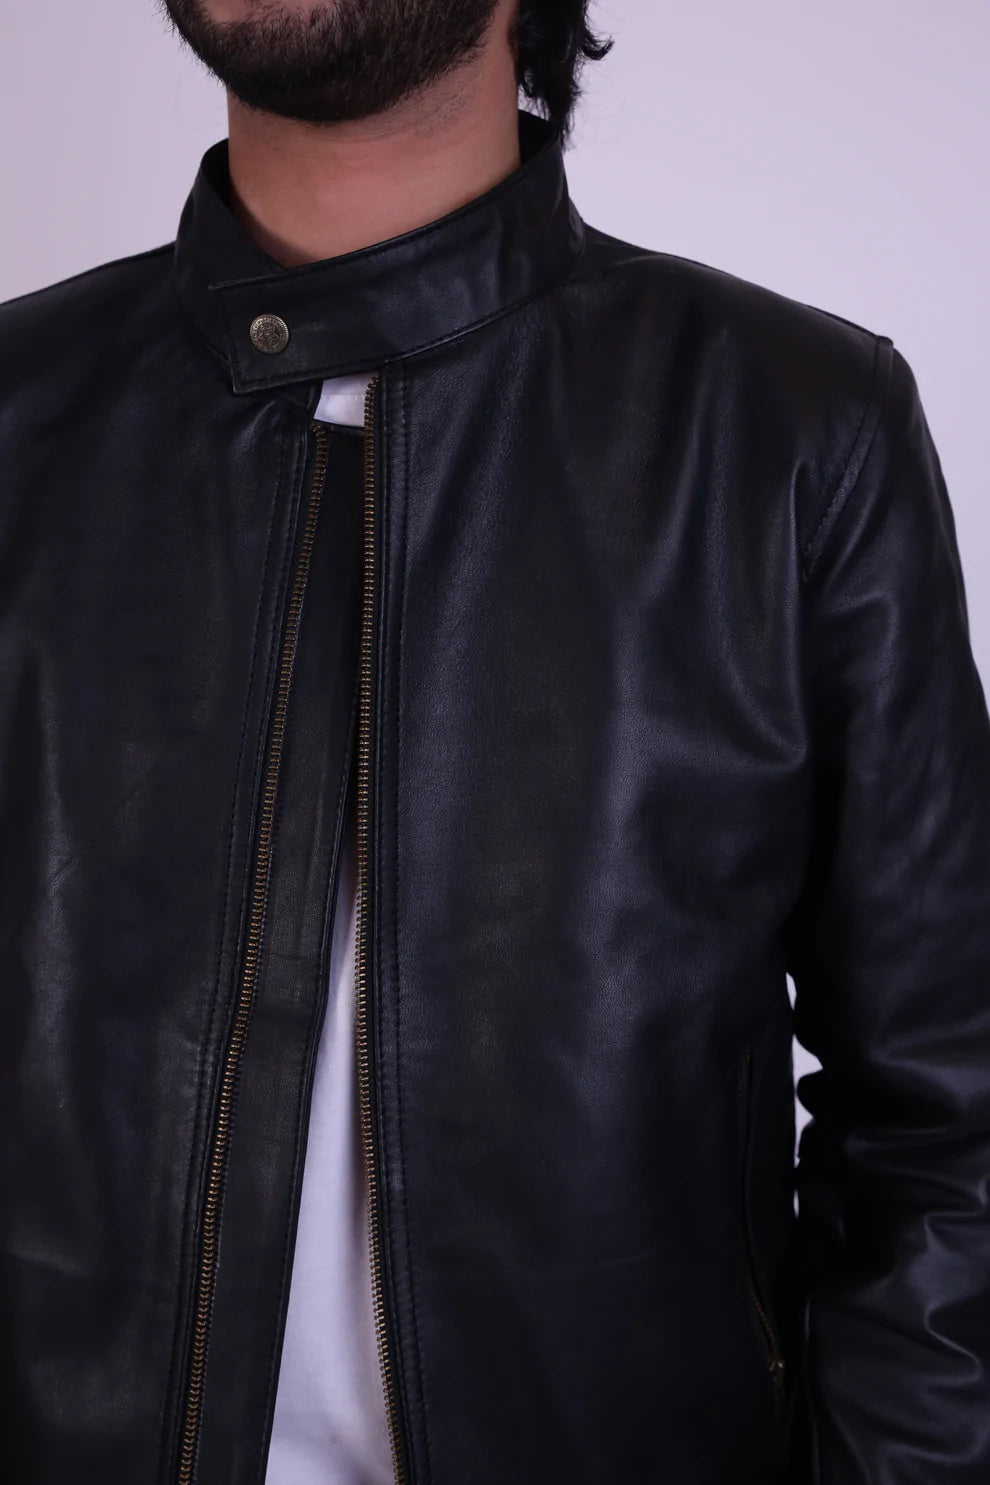 How To Style a Leather Jacket For Men